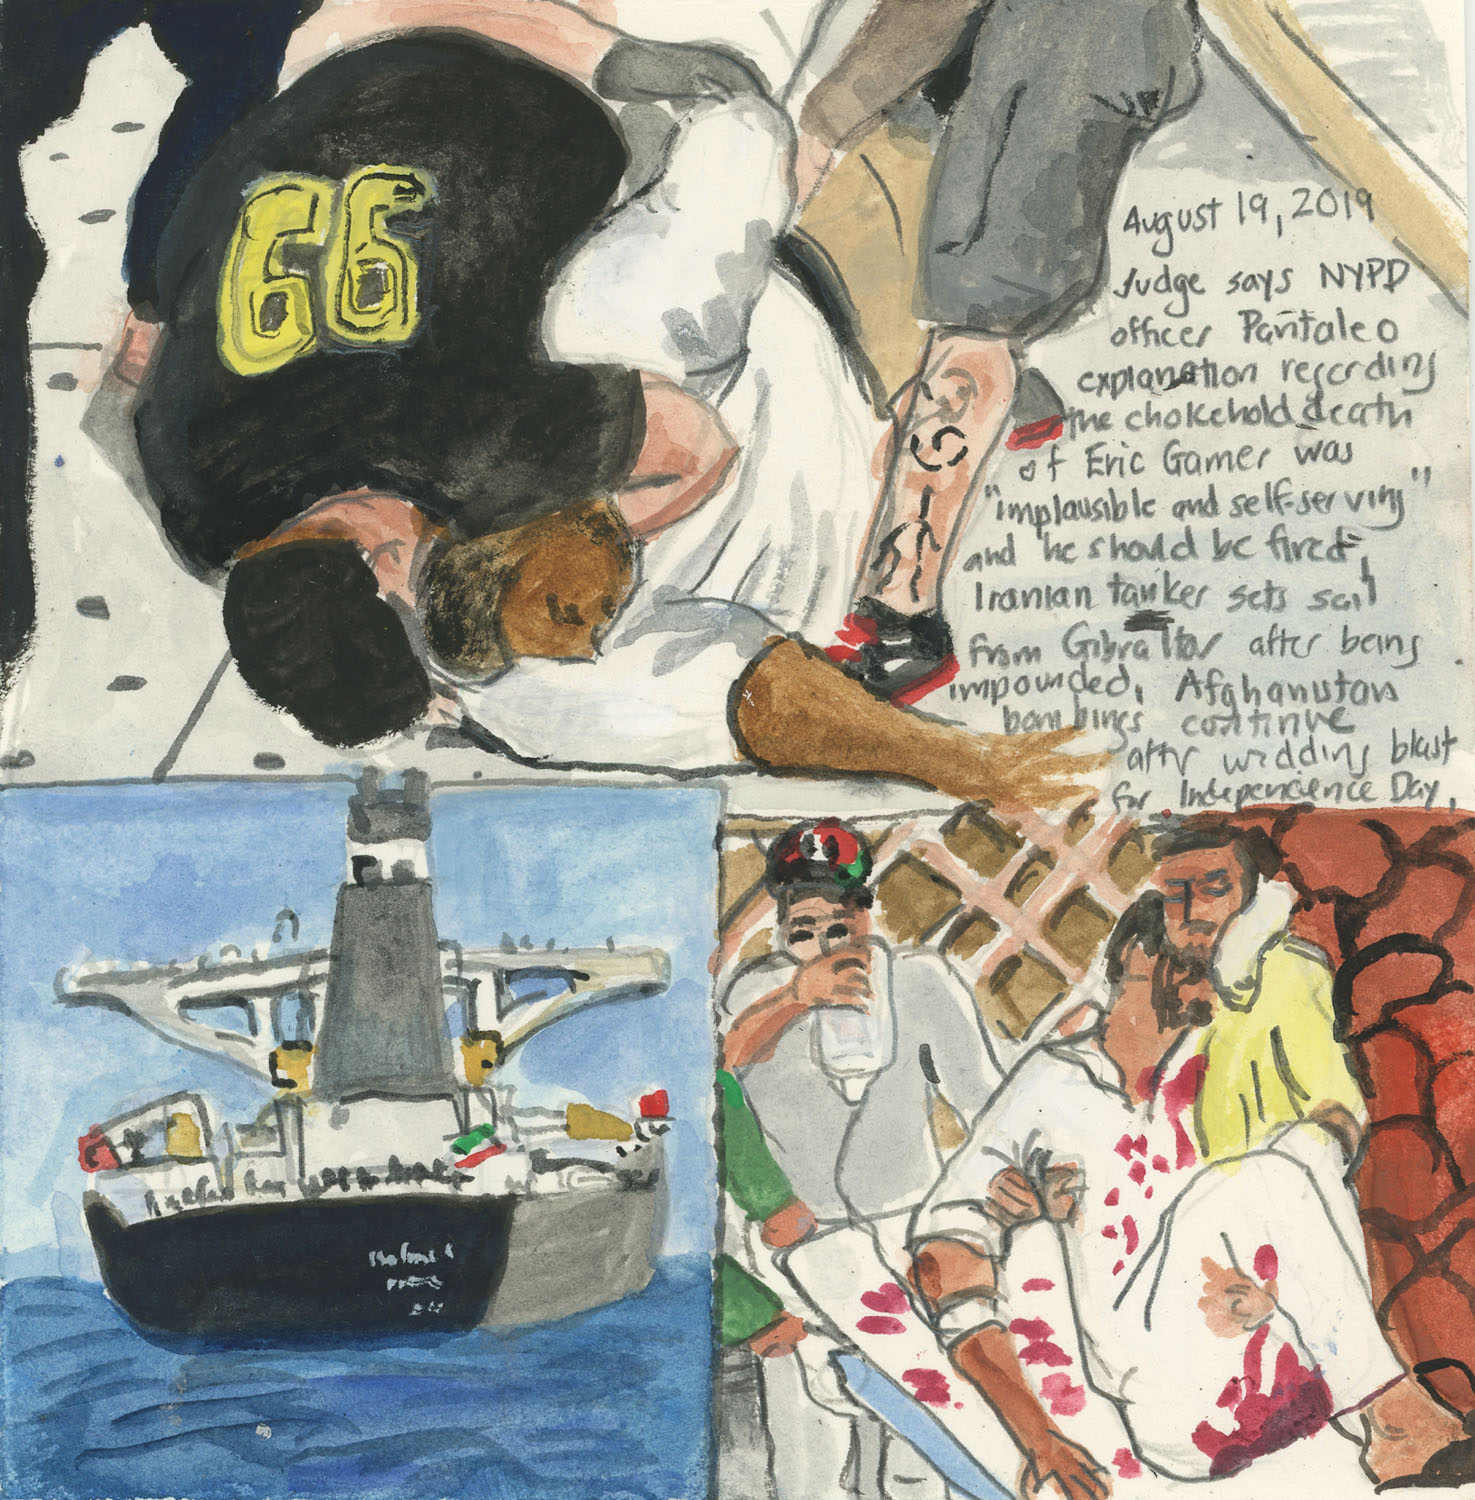 Day 1,367 (Aug. 19, 2019) <br>Gouache, Watercolor, graphite on paper, 5 ½ x 5 ½ in.<br><i>Judge says NYPD officer Pantaleo’s explanation regarding the chokehold death of Eric Garner was “implausible and self-serving” and he should be fired, Iranian tanker sets sail from Gibraltar after being impounded, Afghanistan bombings continue after wedding blast for Independence Day.</i>